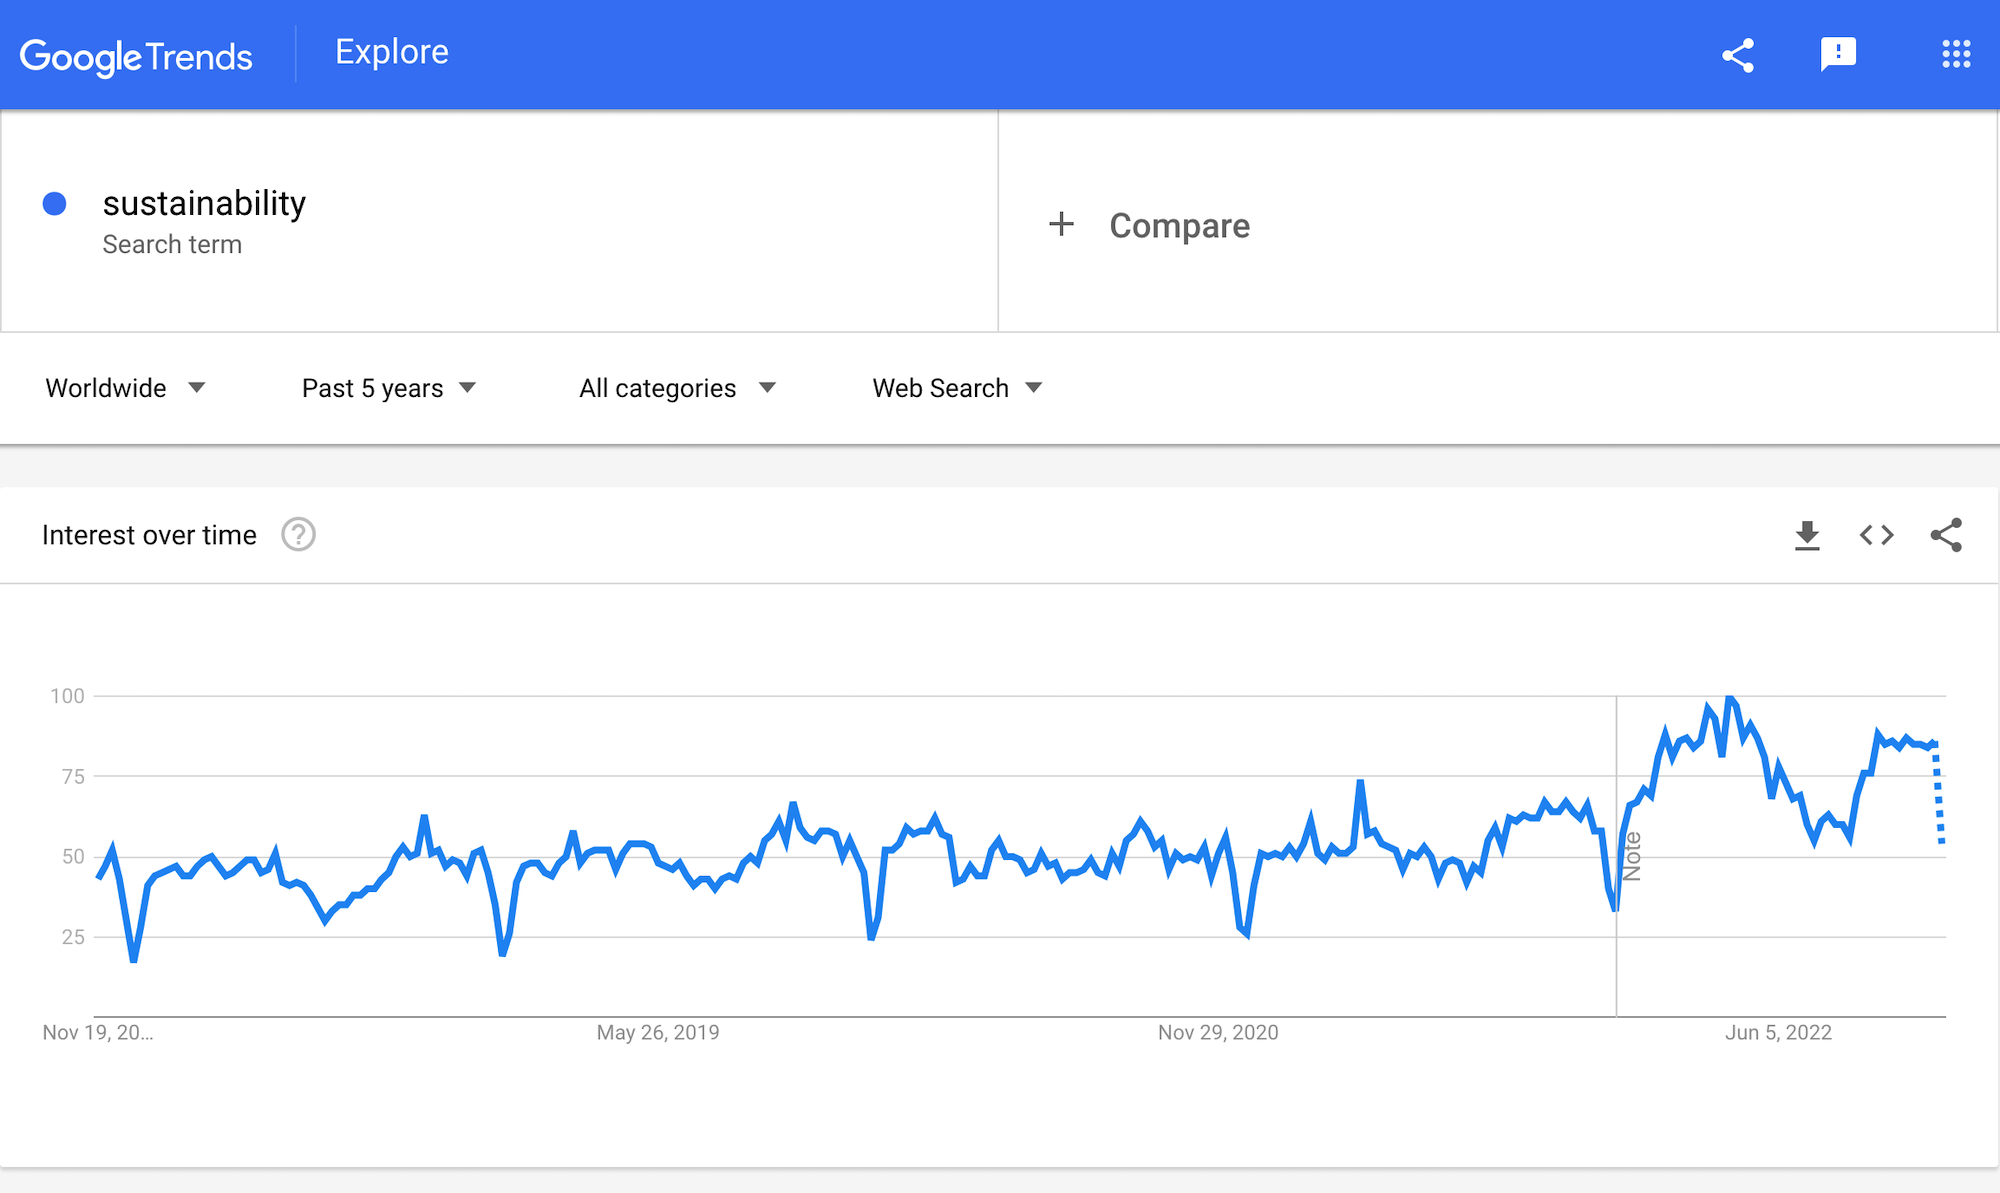 Sustainability as a trend Google Trends graph